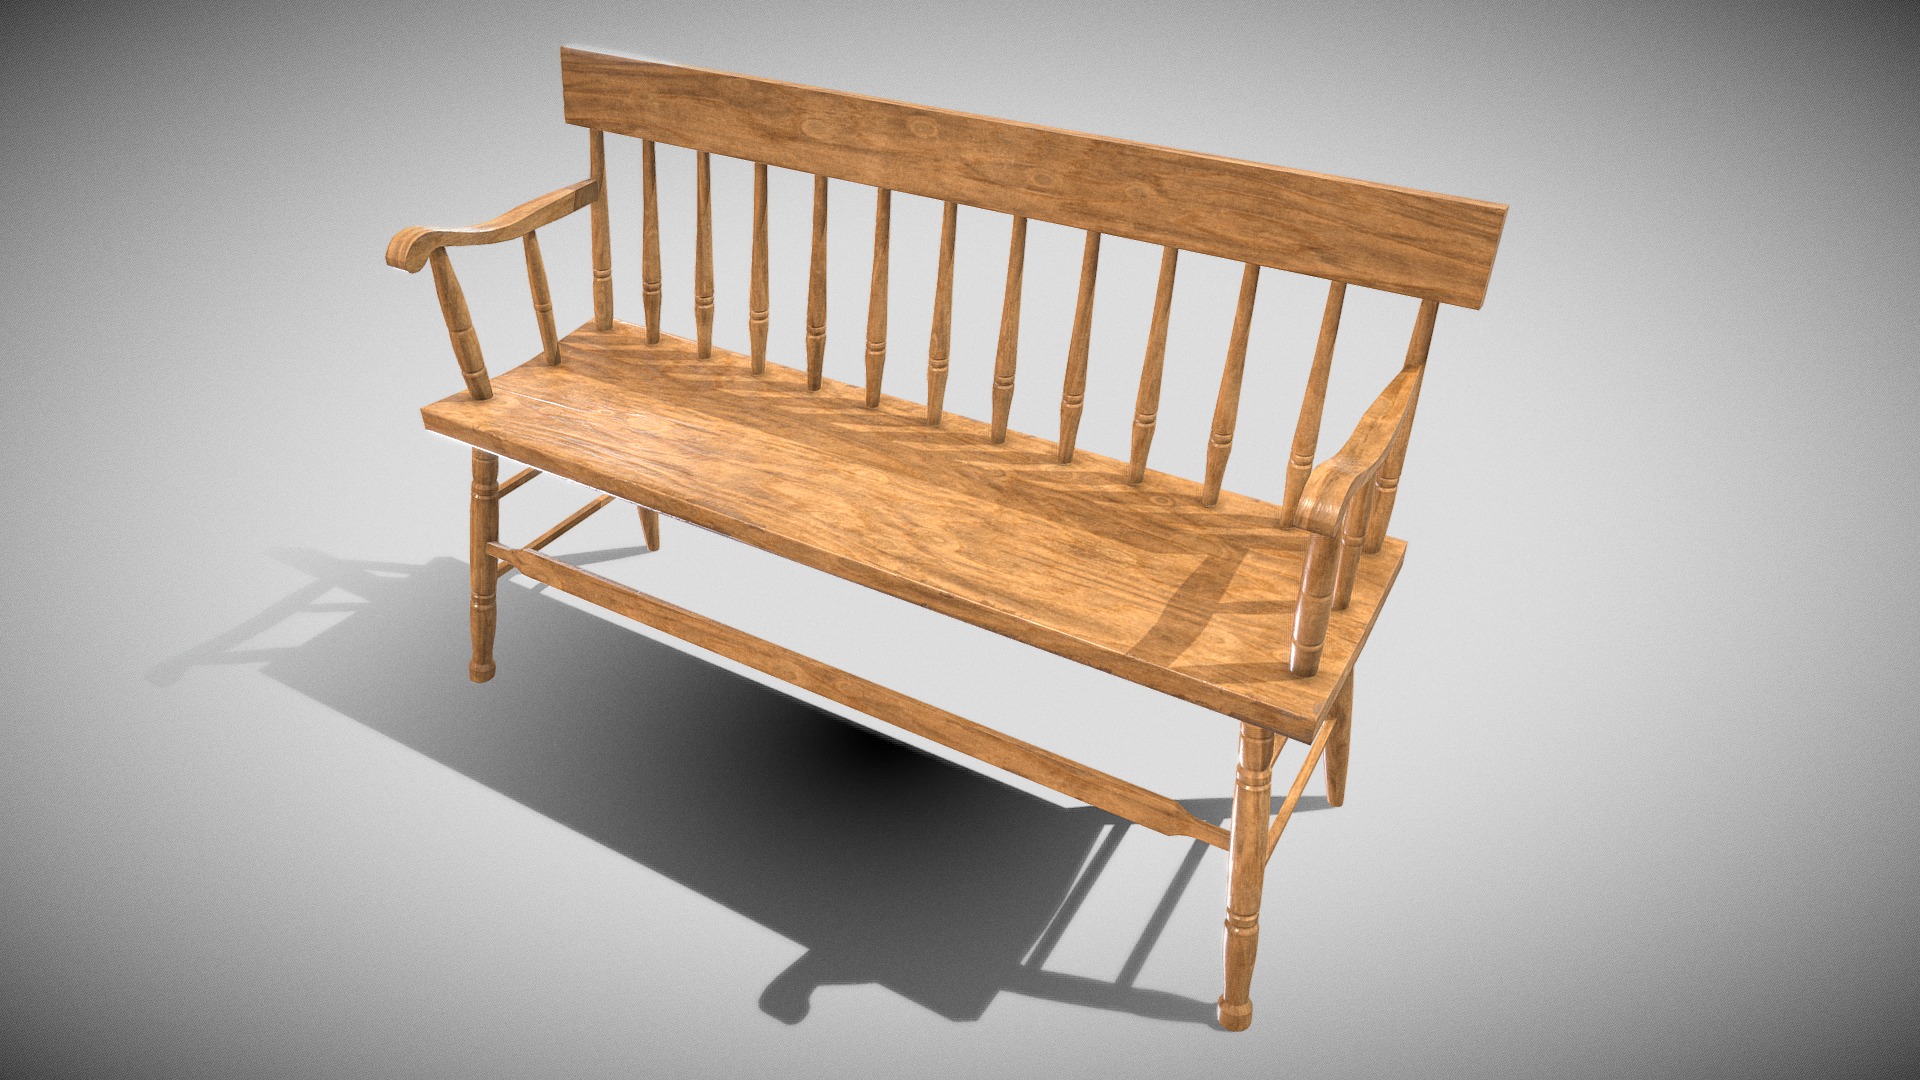 3D model Furniture Bench V-02 - This is a 3D model of the Furniture Bench V-02. The 3D model is about a wooden bench with a shadow.